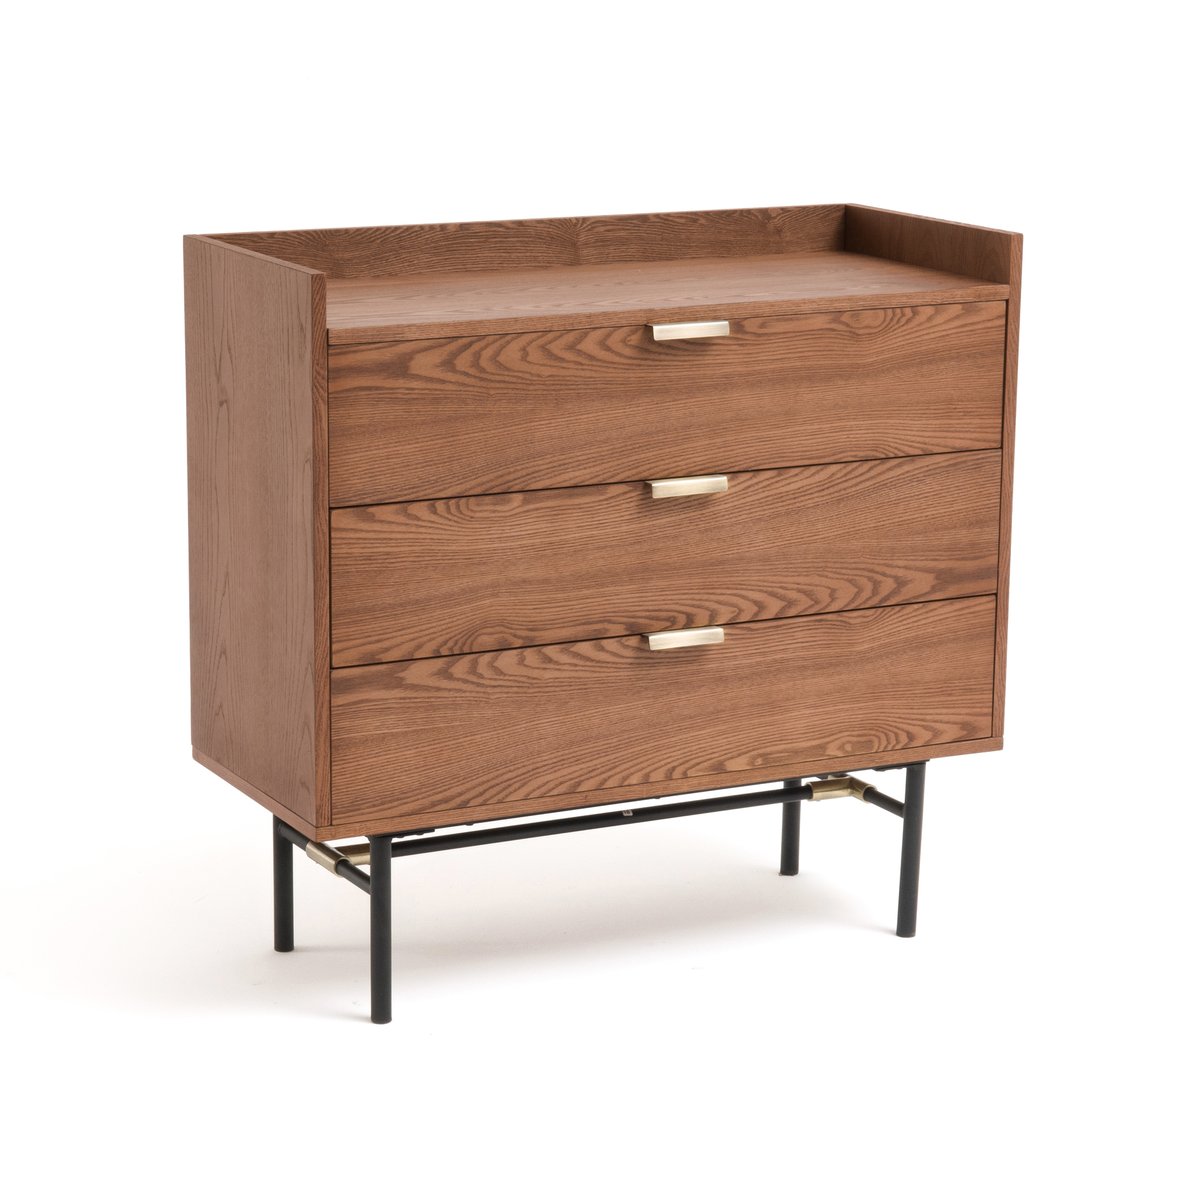 Image of Botello Chest of Drawers (3 Drawers)